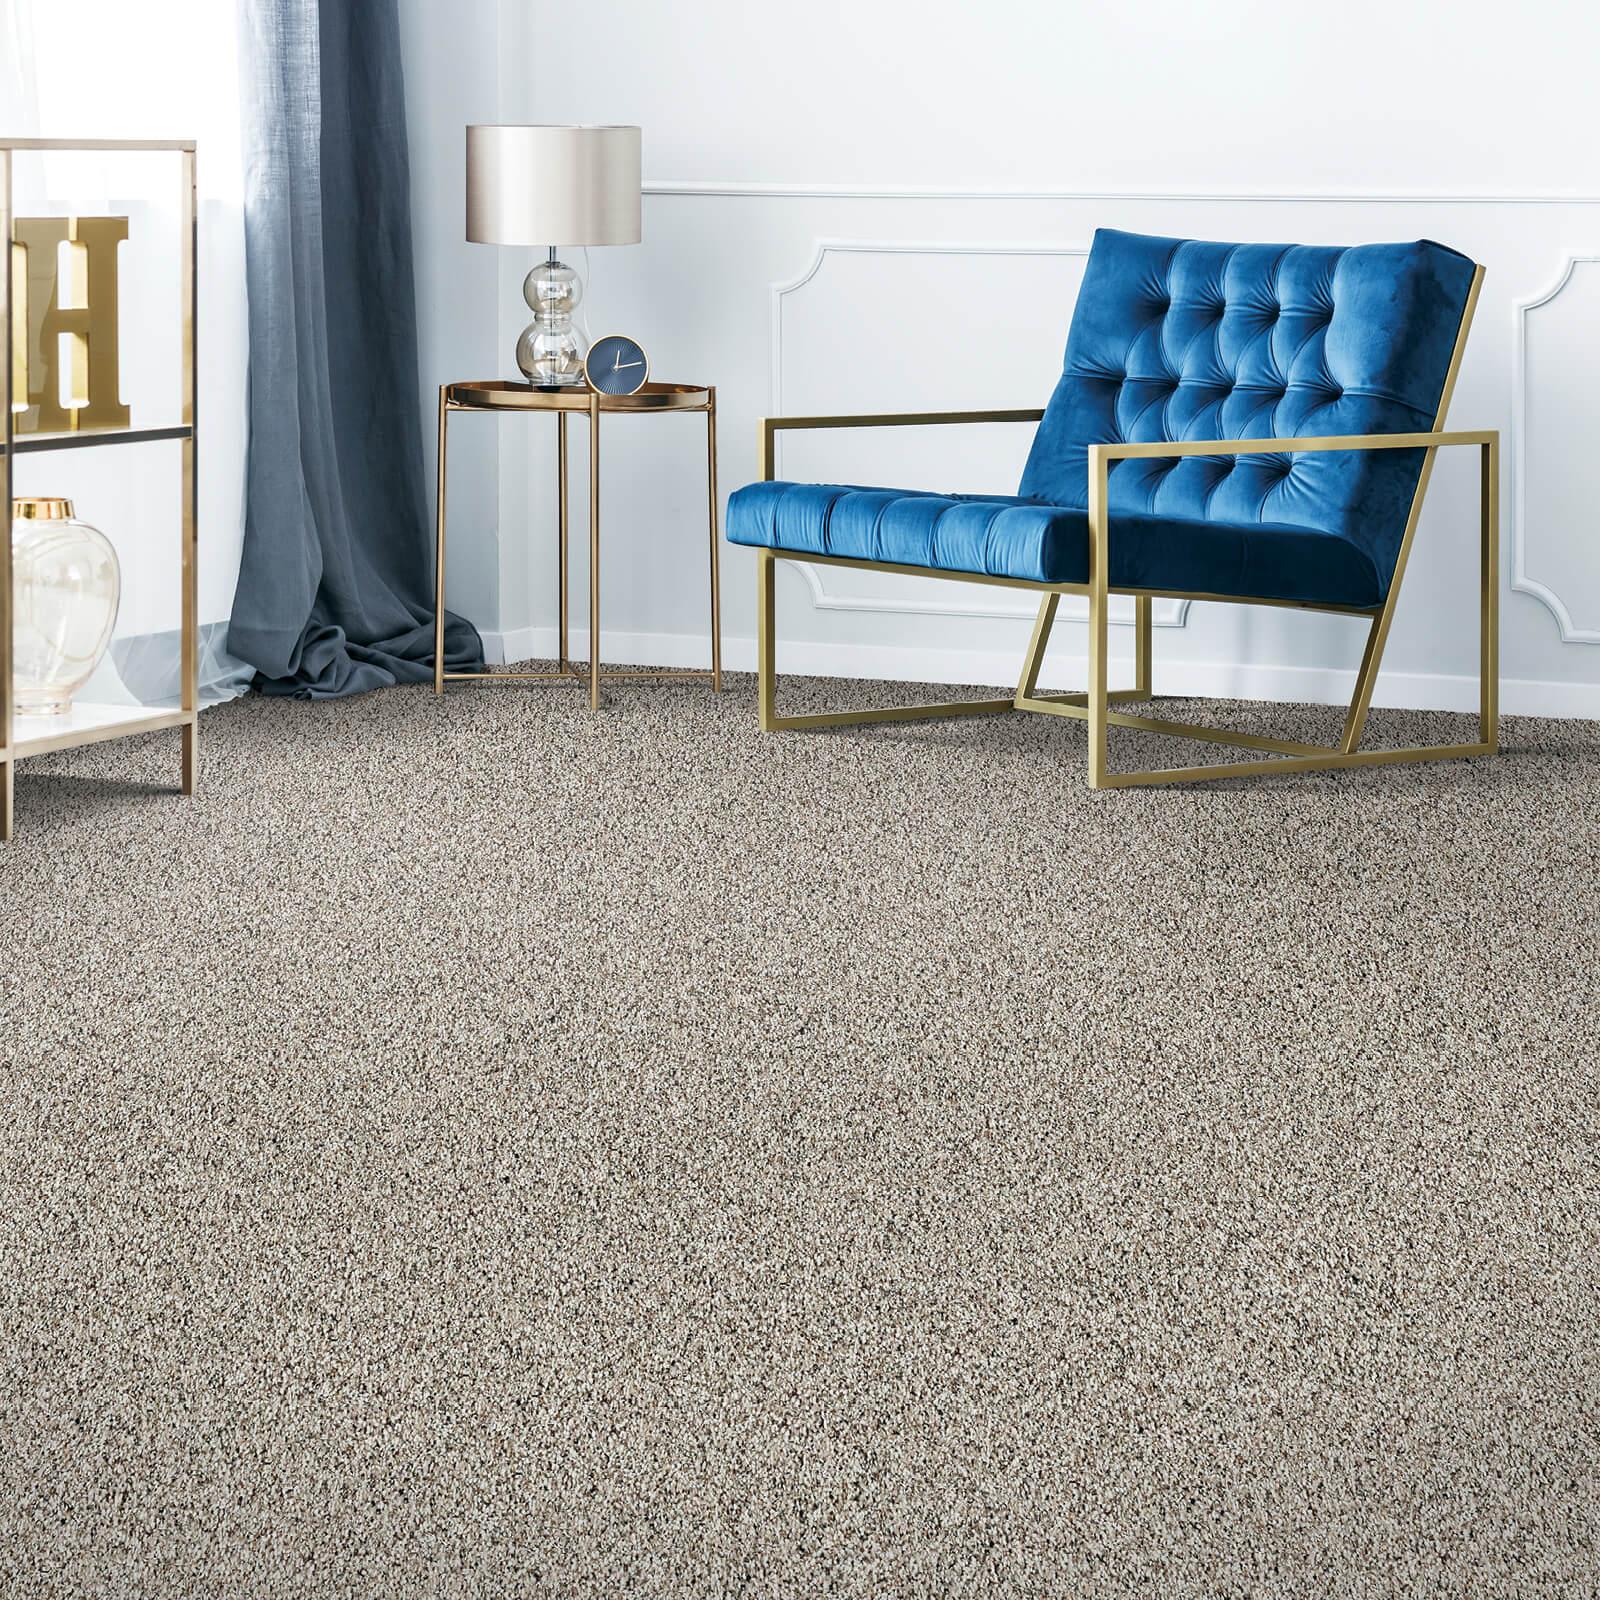 Carpet flooring with blue couch | The Carpet Gallery